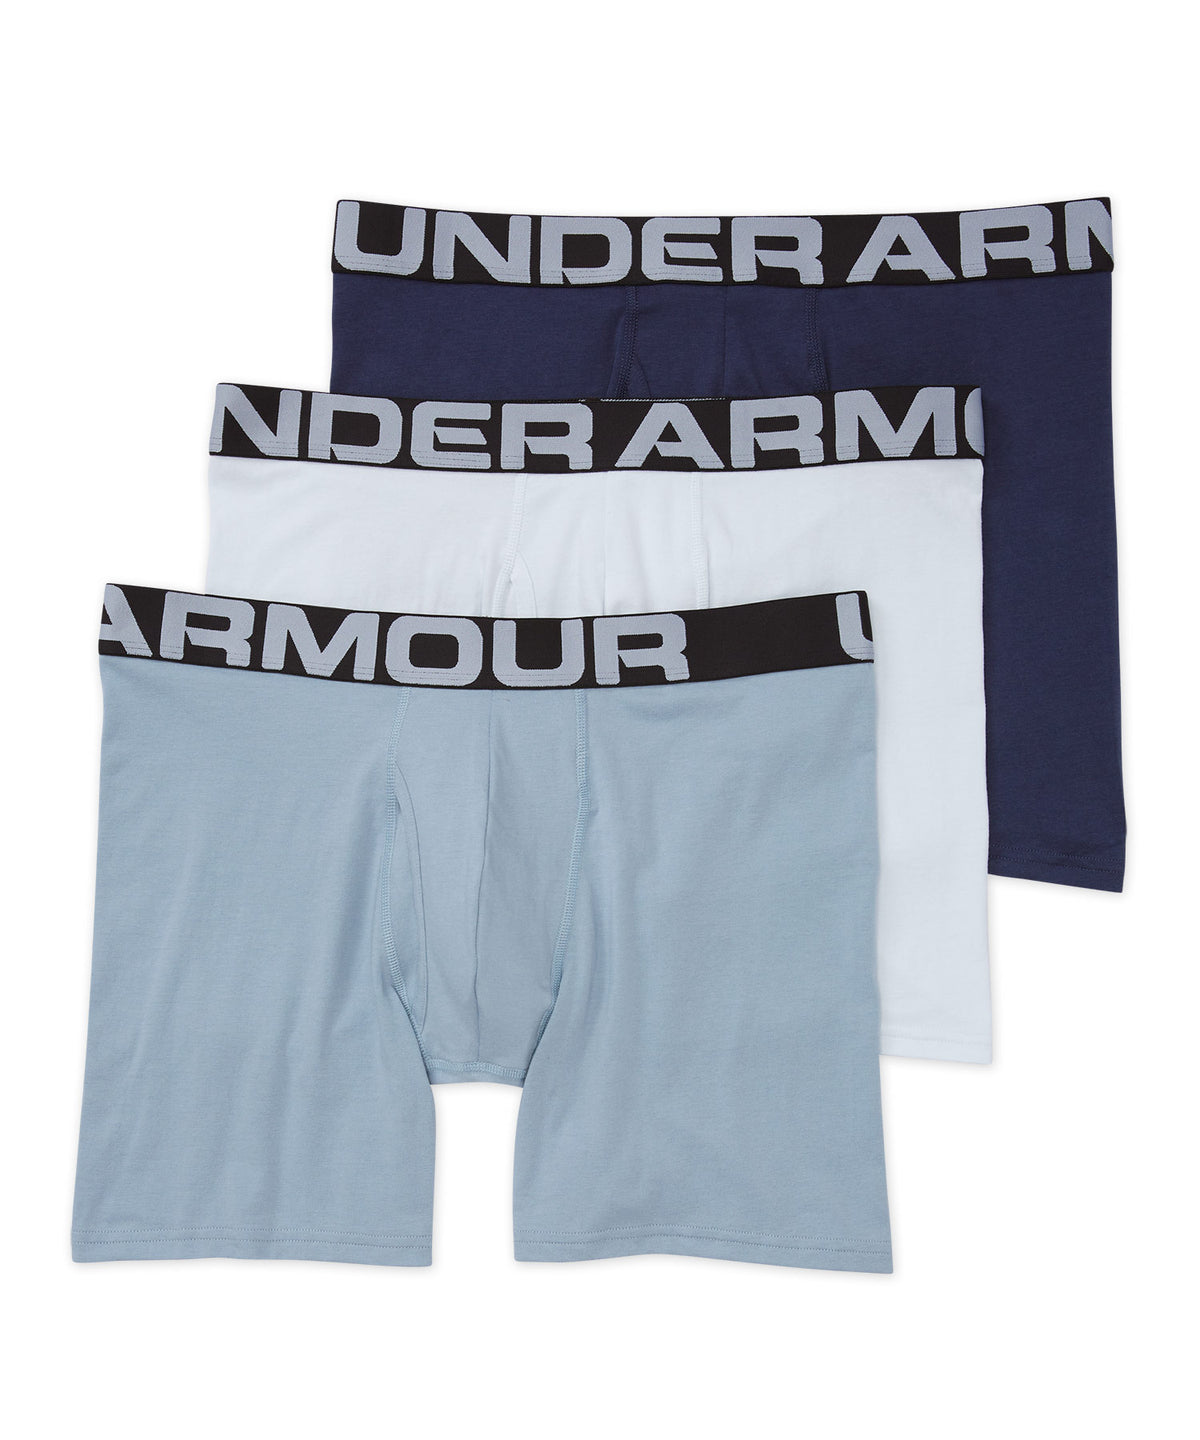 Men's Charged Cotton® 6 Boxerjock® Boxer Brief (3 Pack) from Under Armour